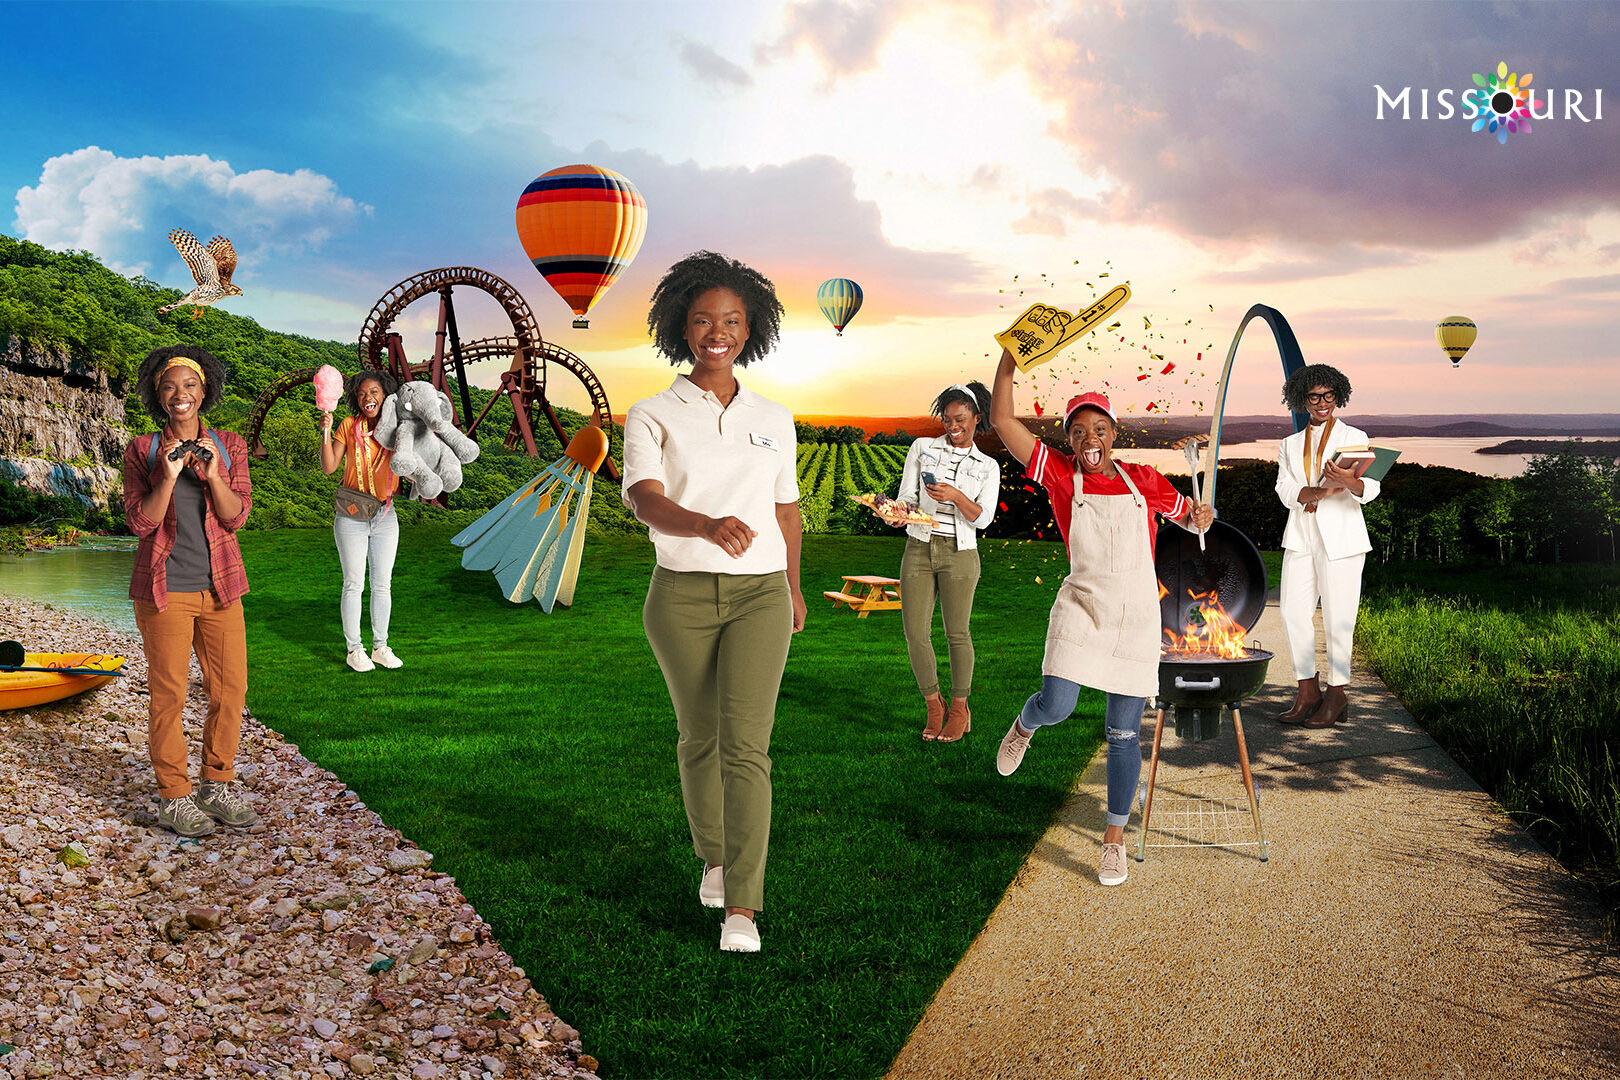 Advertisement showing a woman enjoying a variety of activities in Missouri, such as bird watching, visiting an amusement park, dining, tailgating, and visiting the Gateway Arch.